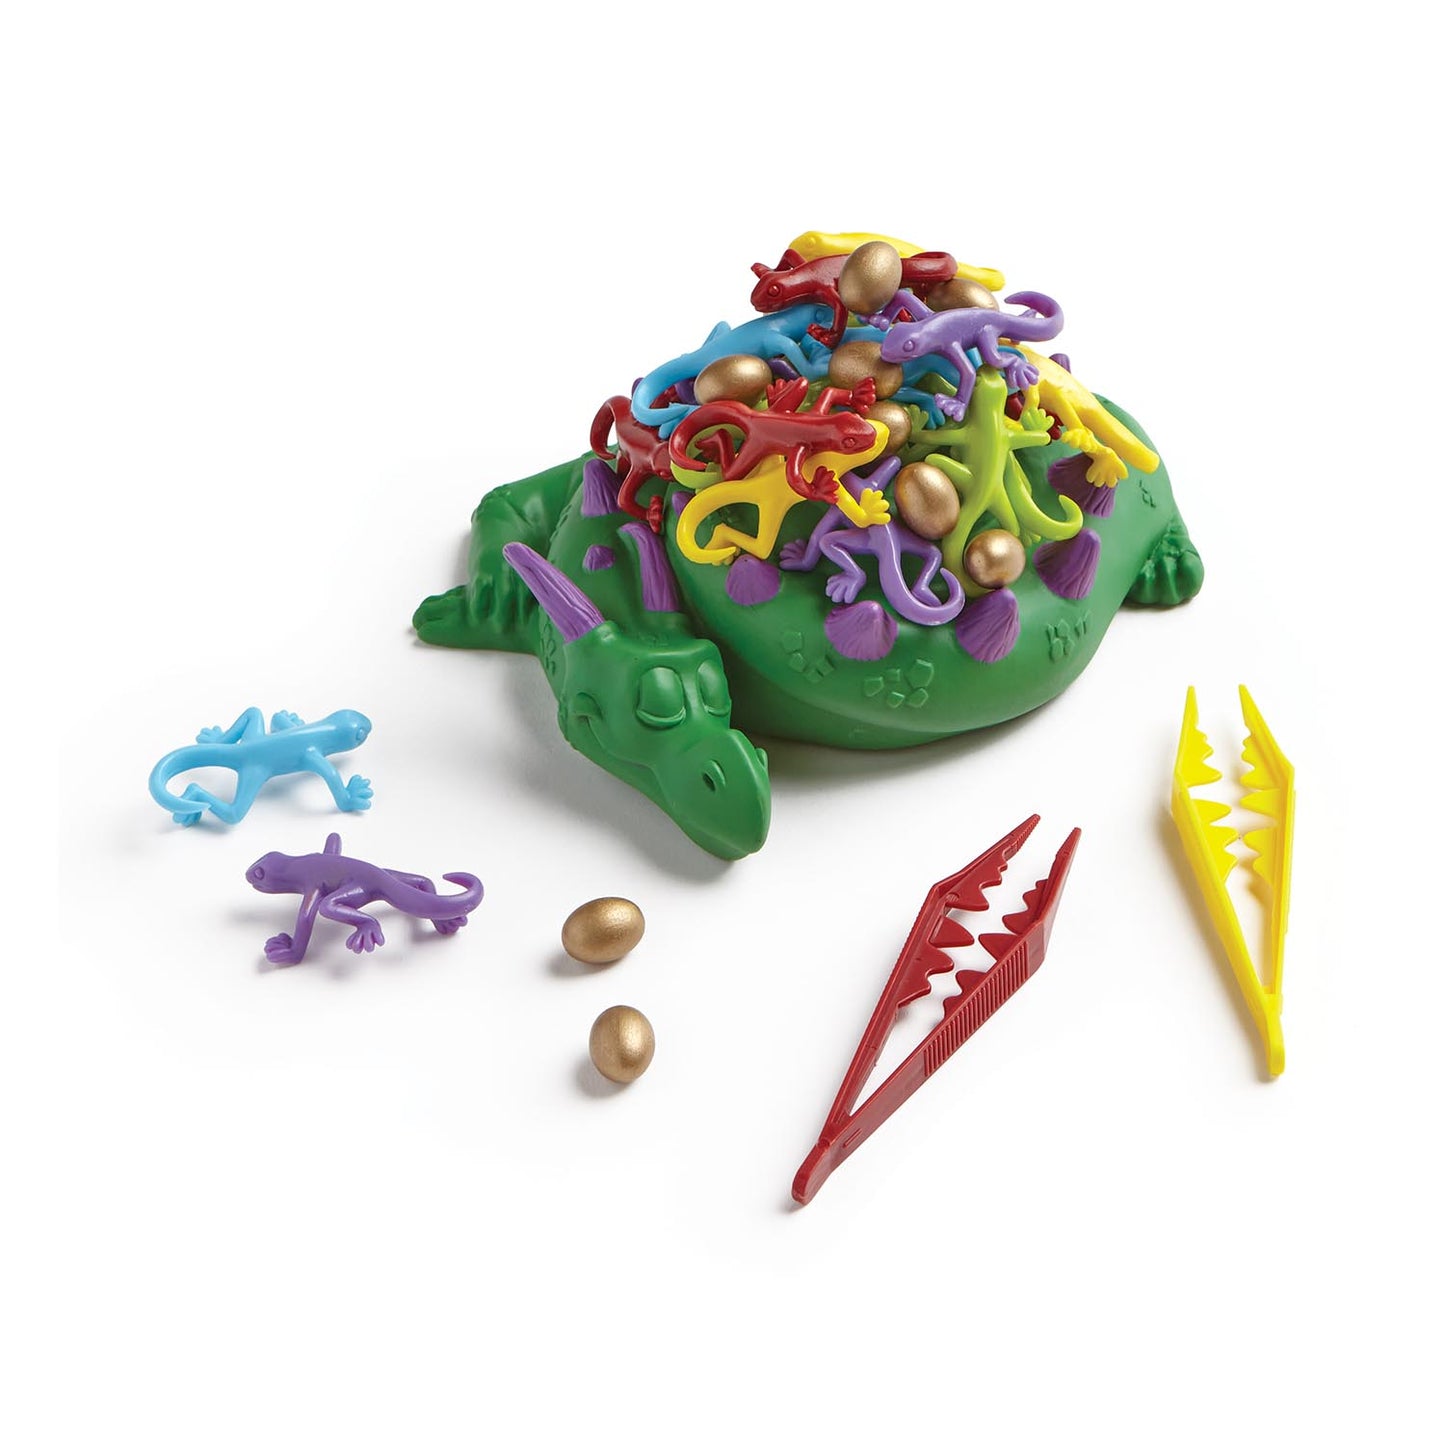 Dreaming Dragon by SimplyFun is a fine motor skill game and spatial reasoning game for ages 6 and up